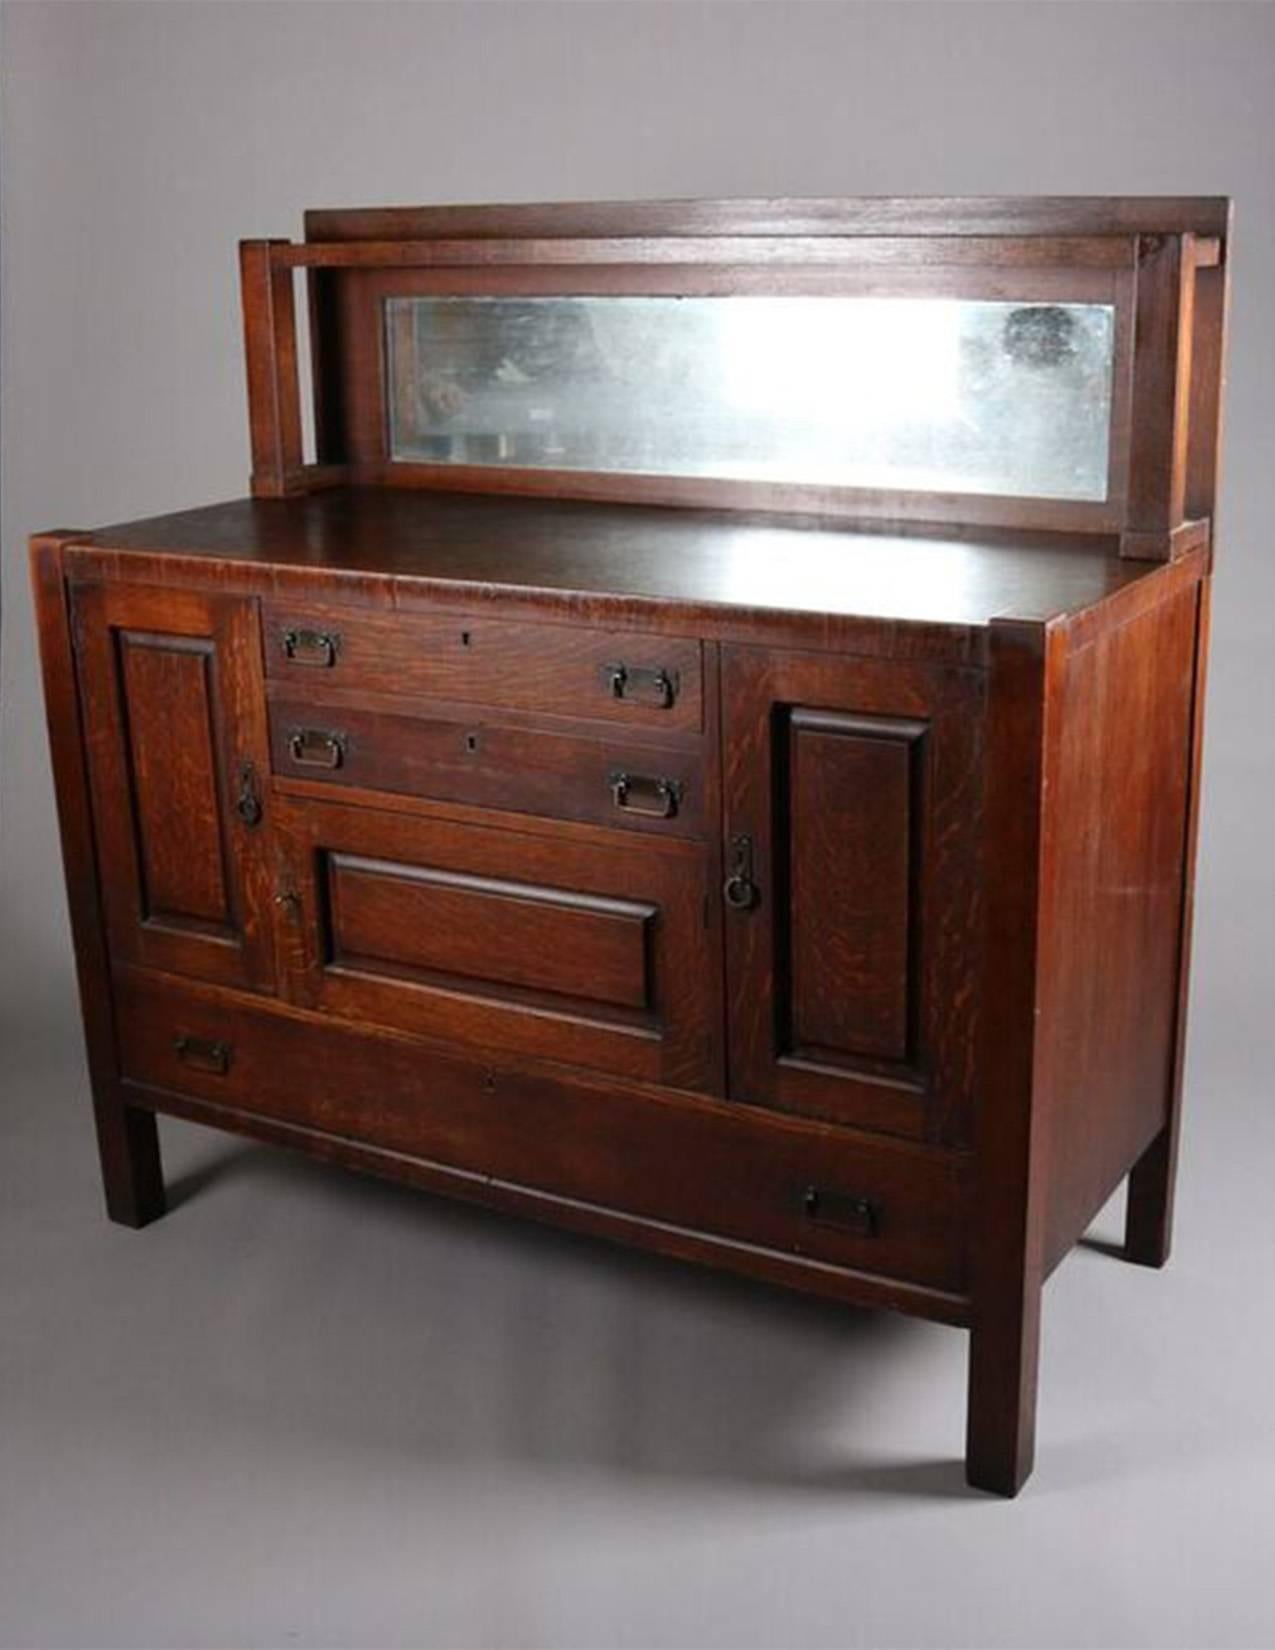 Antique Arts & Crafts Mission oak sideboard features mirrored backsplash above case with two center drawers and cabinet flanked by side cabinets and above a single long drawer, circa 1910

Measures: 54.5" H x 53.5" W x 24" D.